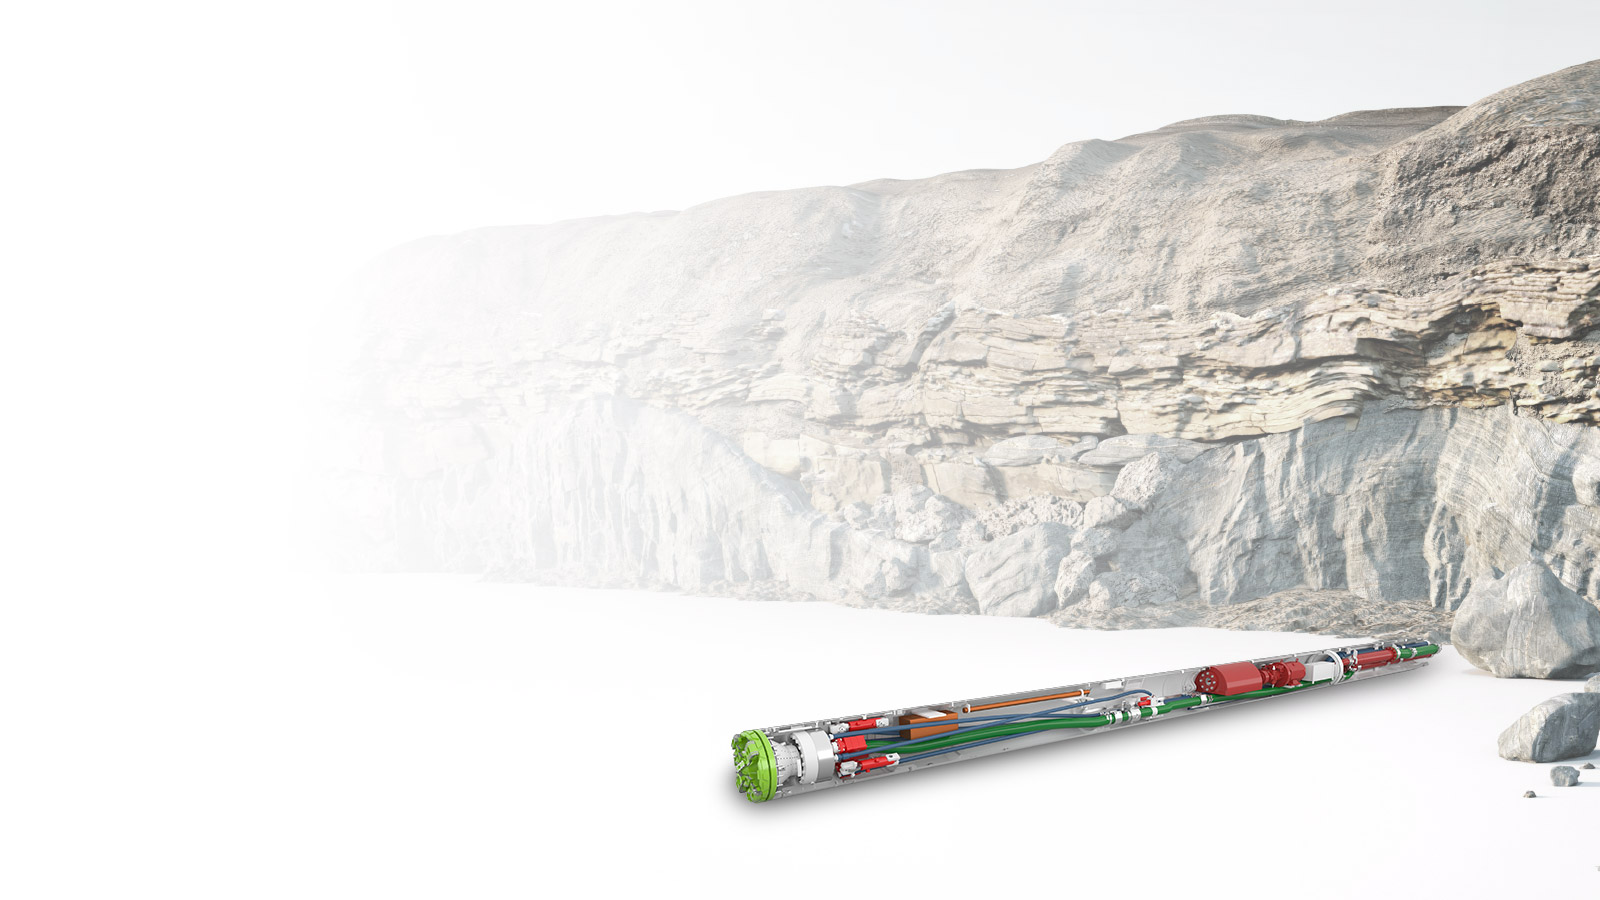 Illustration of an E-Power Pipe, which also allows a view inside with a stone wall in the background.